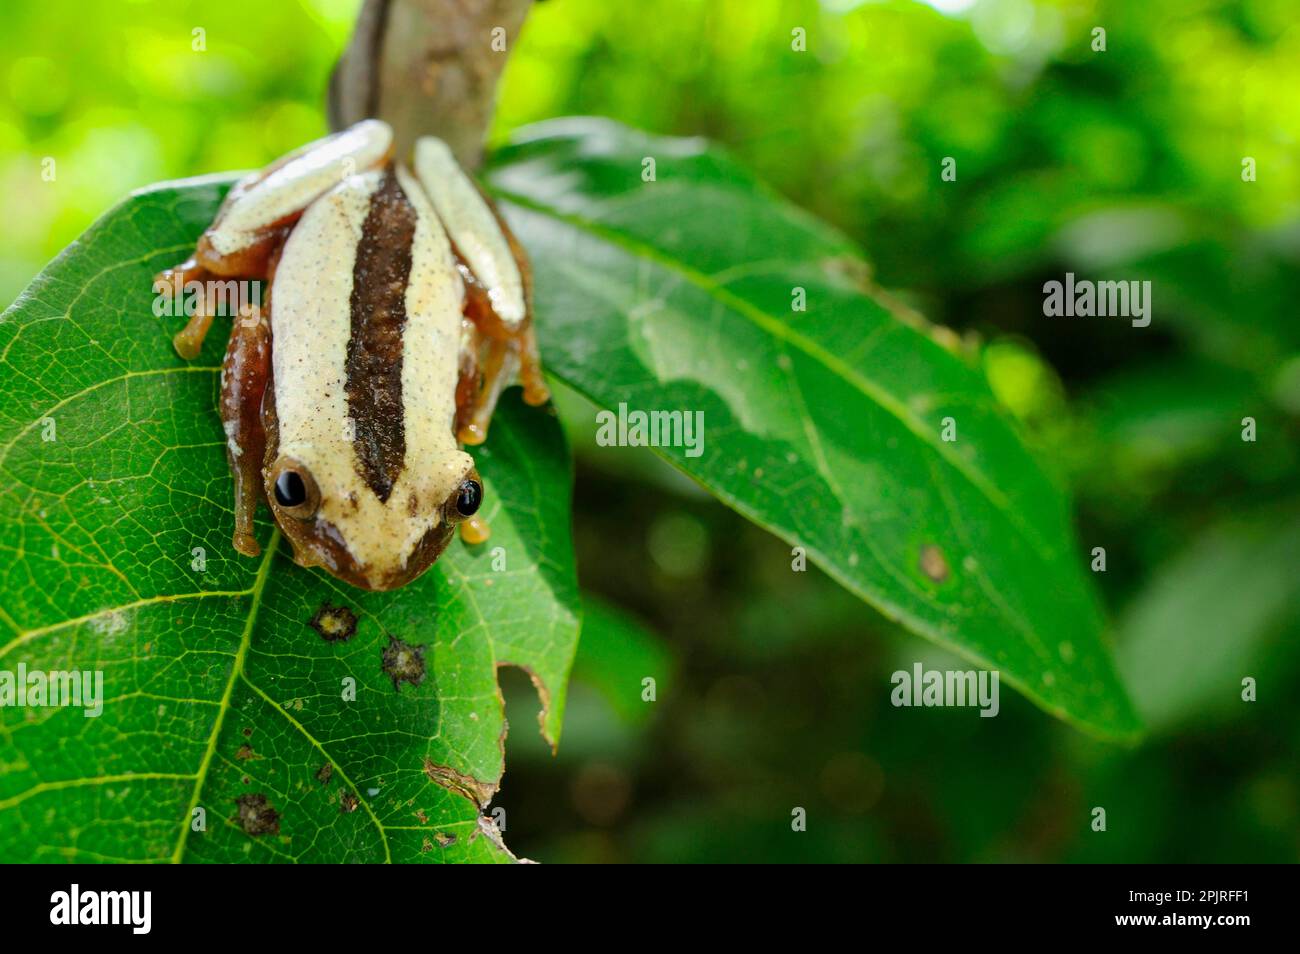 Banana frog, Banana frogs, Reed frogs, Amphibians, Other animals, Frogs, Animals, Fornasini's Spiny Reed Frog (Afrixalus fornasini) adult, sitting on Stock Photo